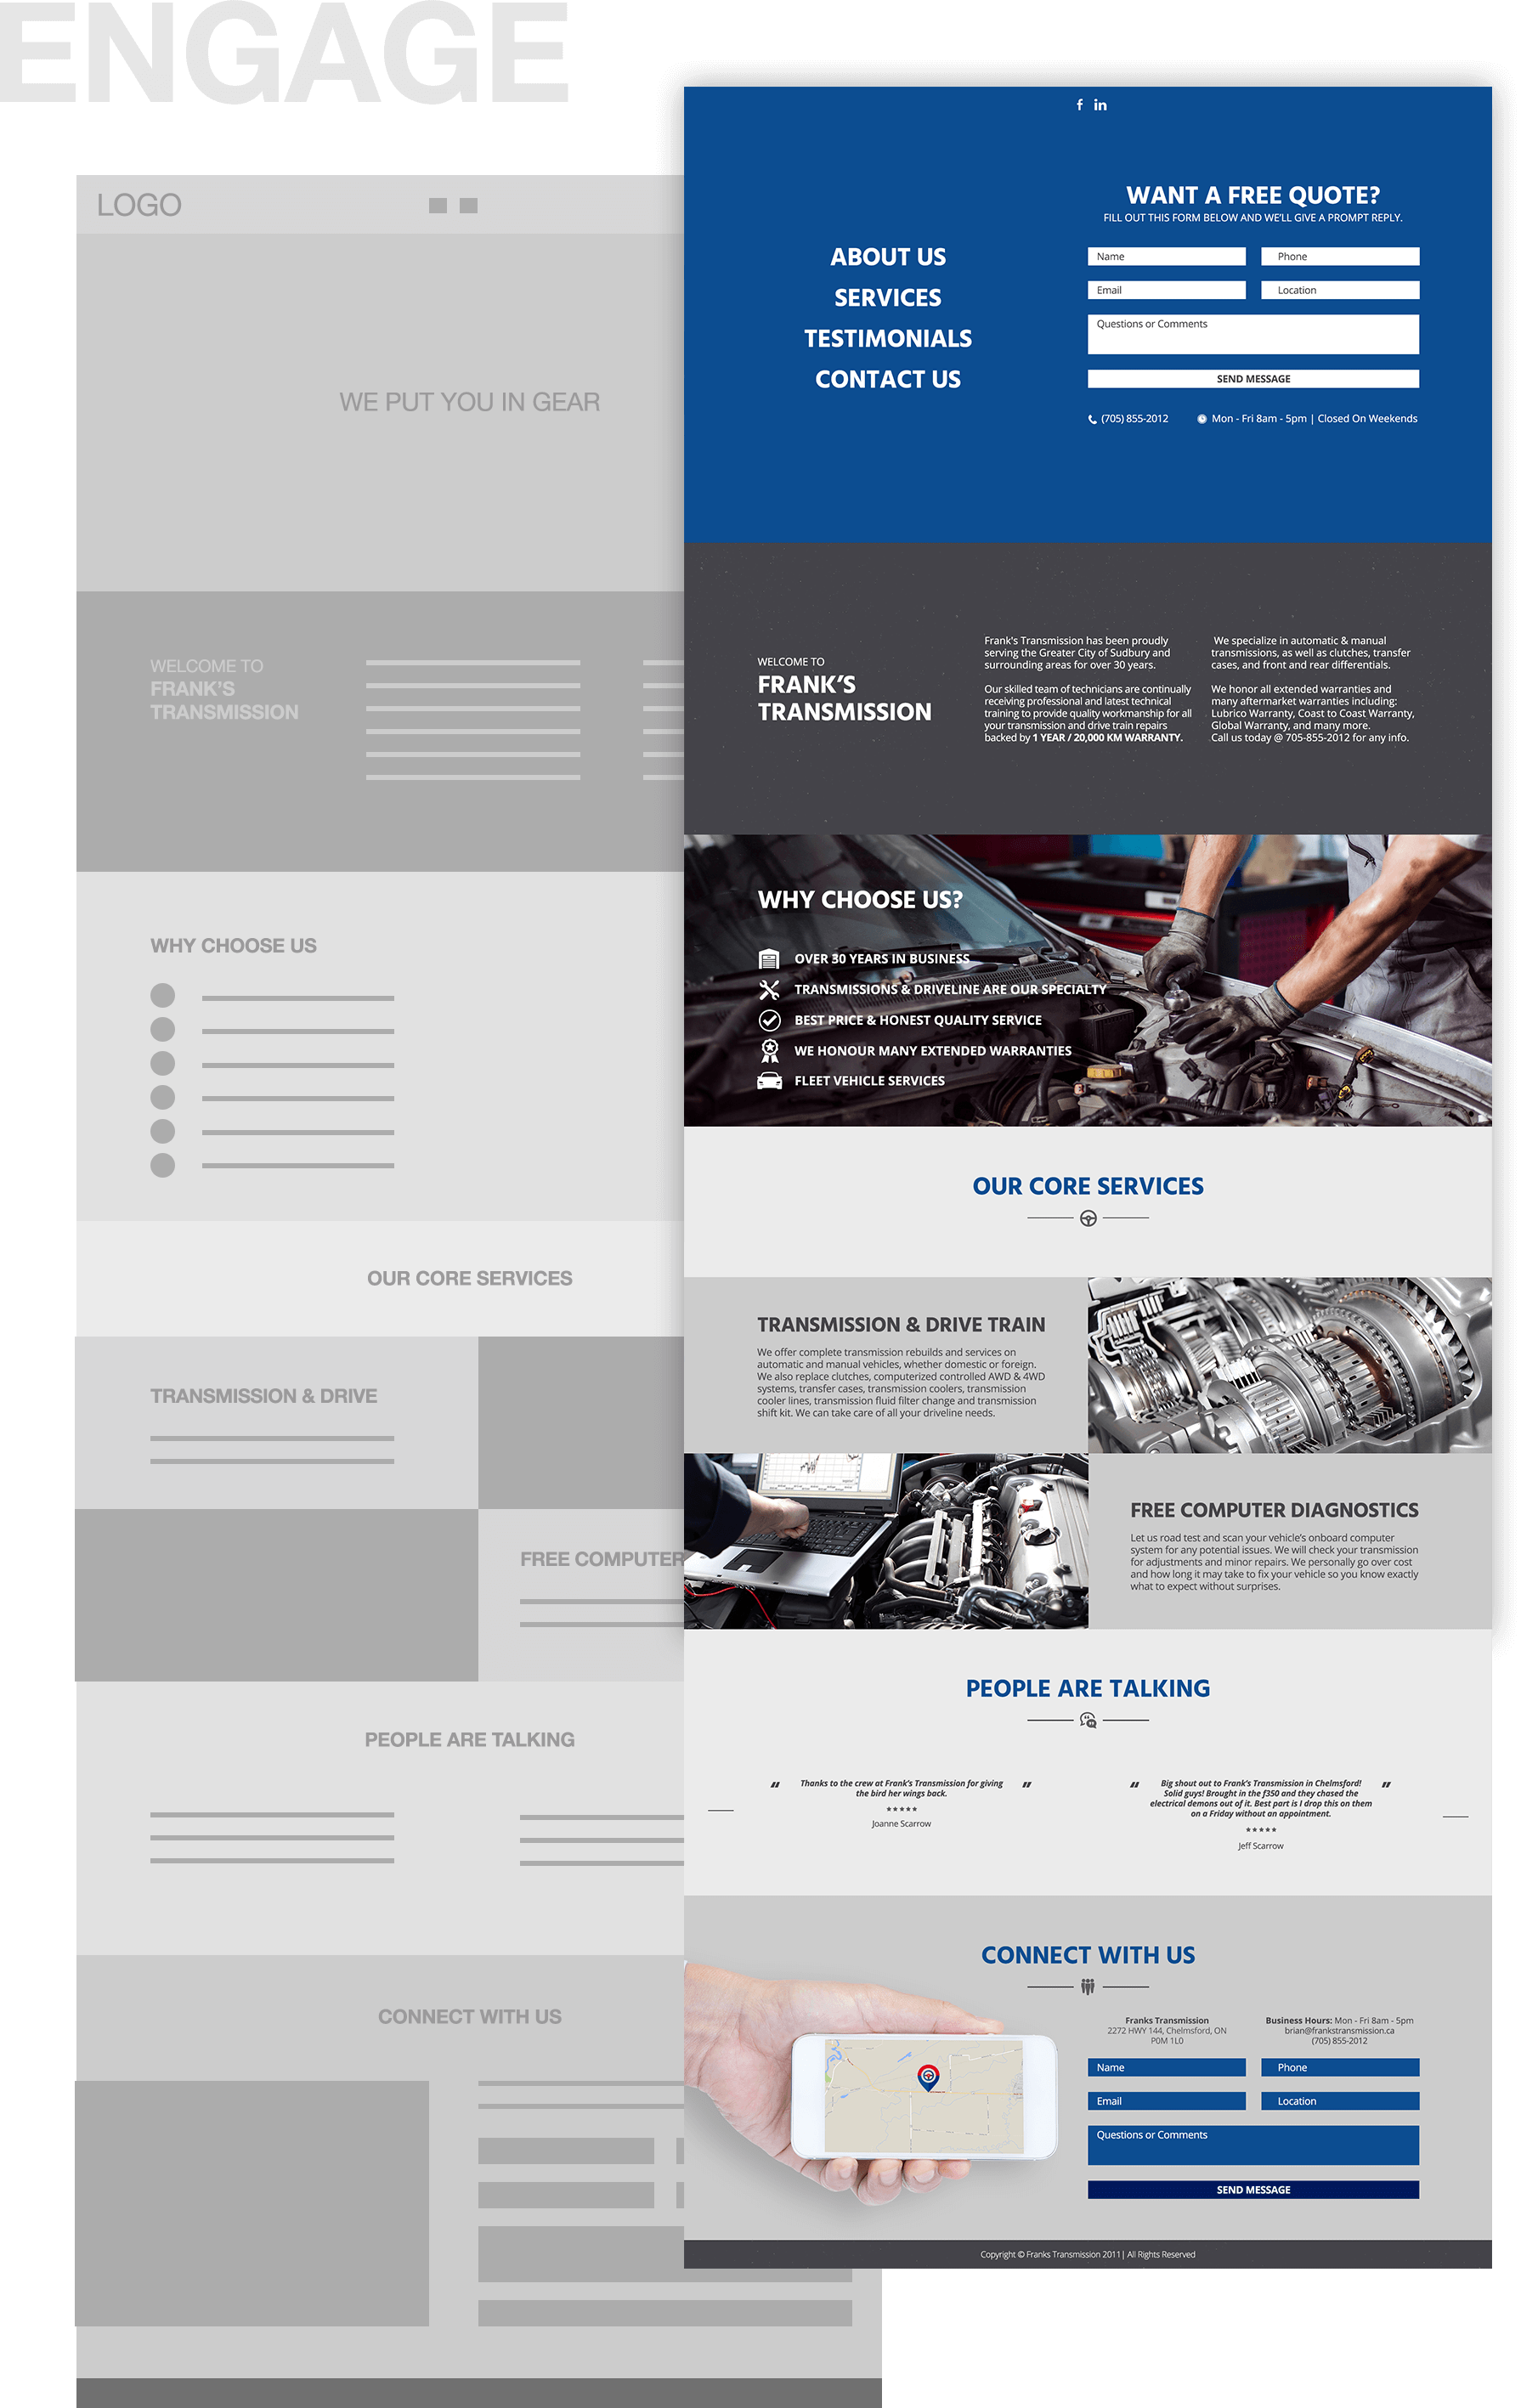 Graphic Design of a wireframe mockup underneath the finished website design